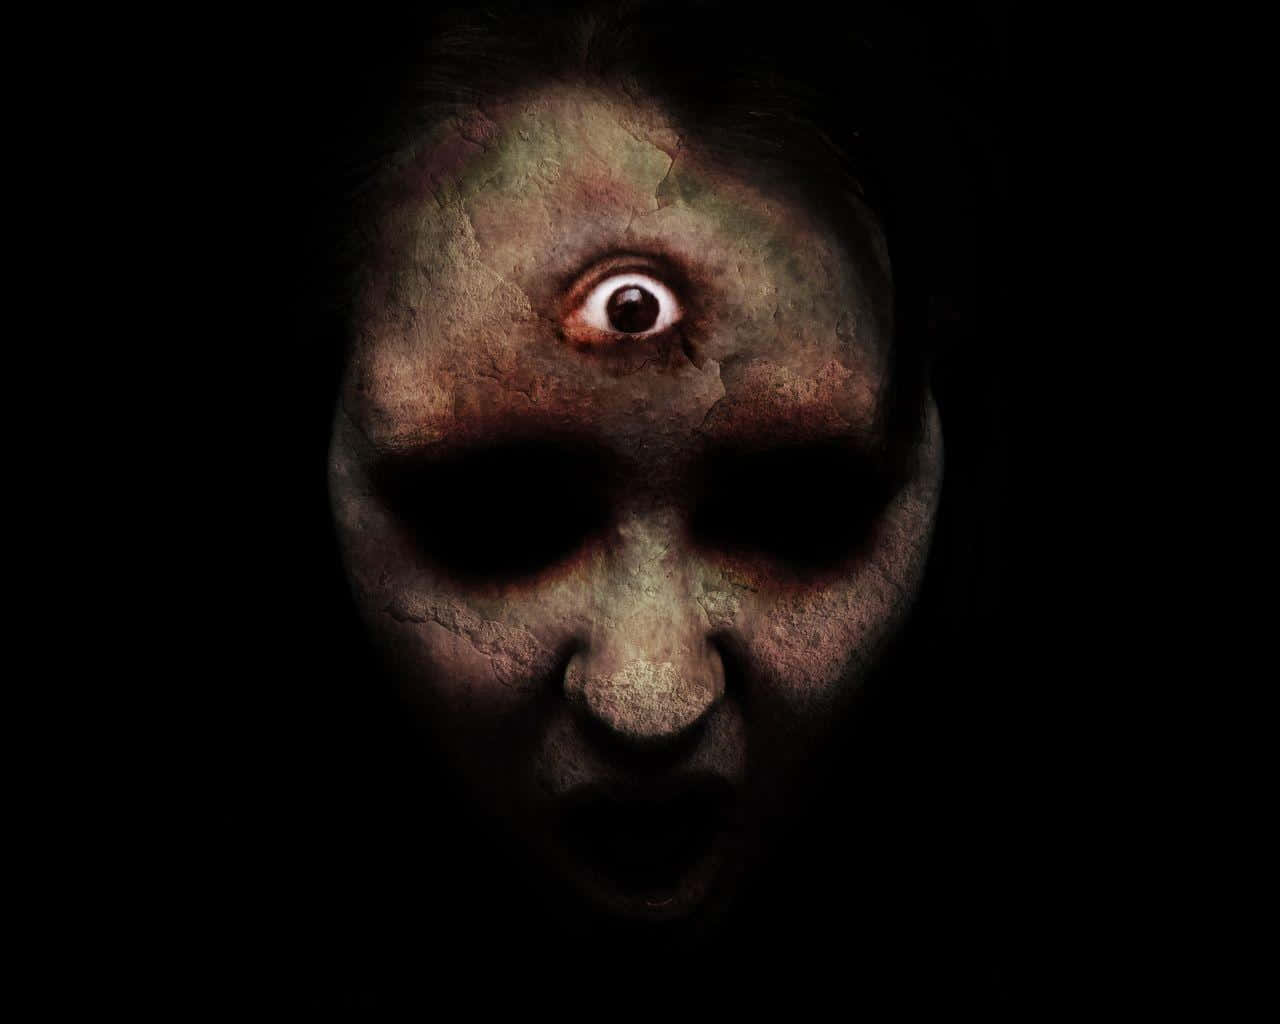 A Woman With A Scary Face And A Large Eye Wallpaper